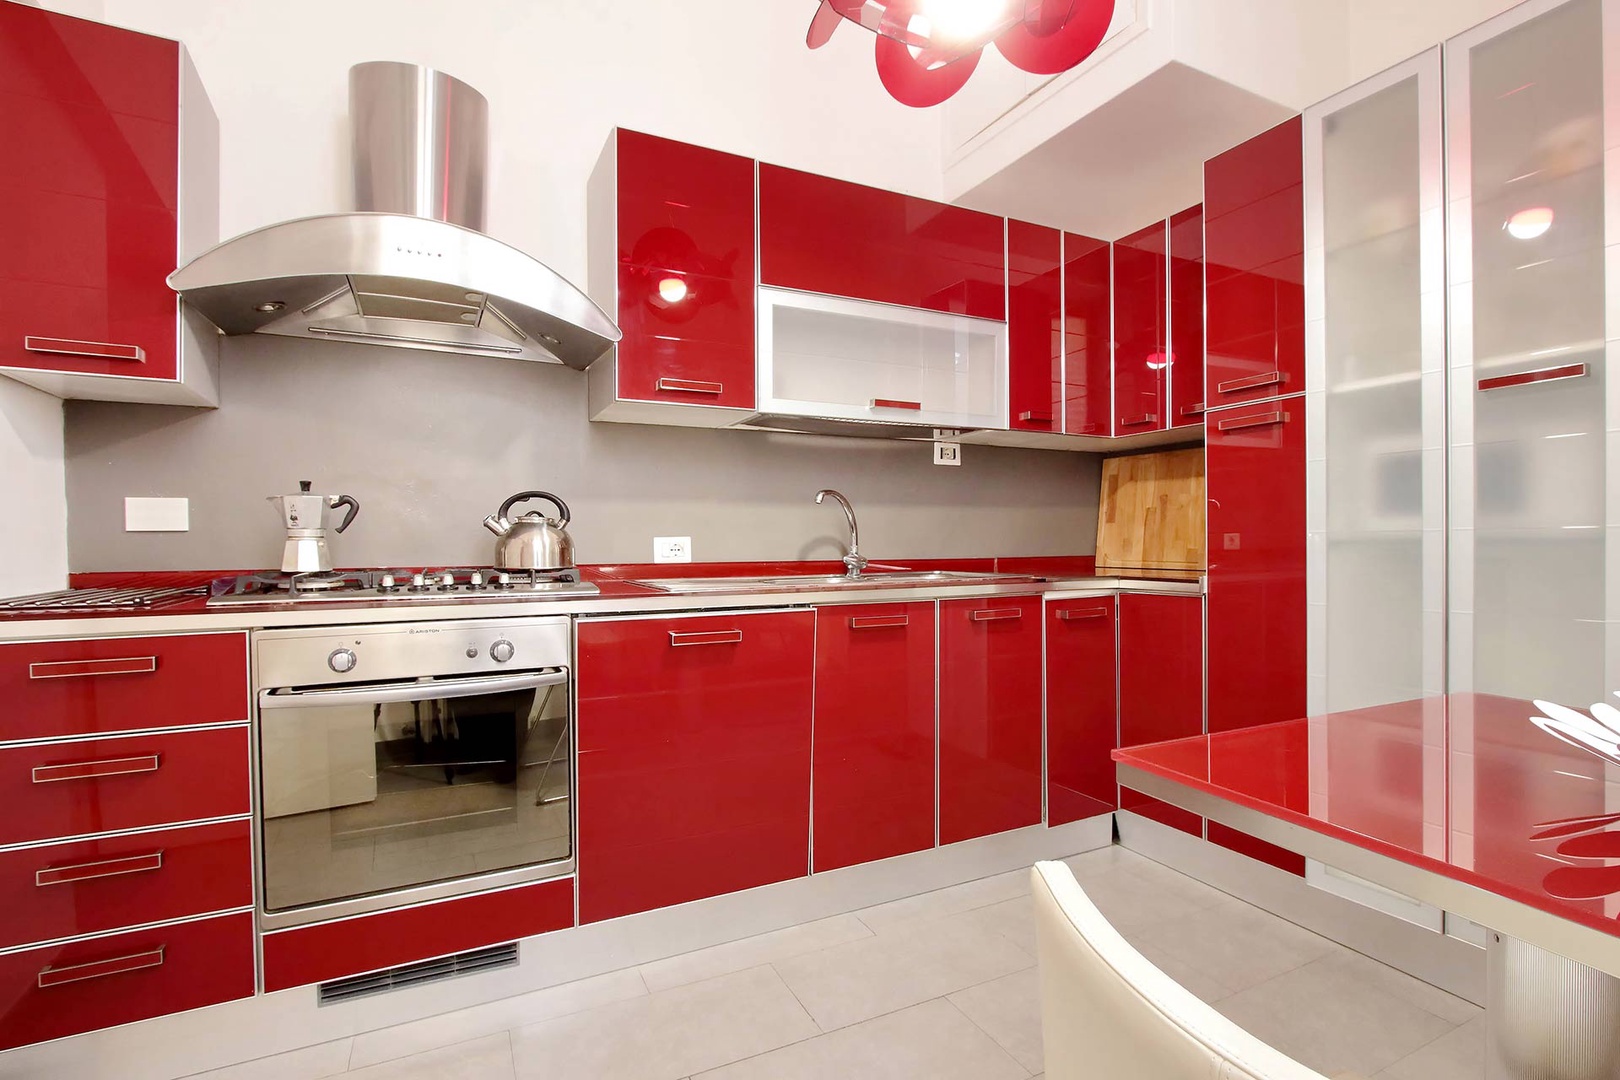 The bright and fully equipped kitchen is perfect for cooking at home.